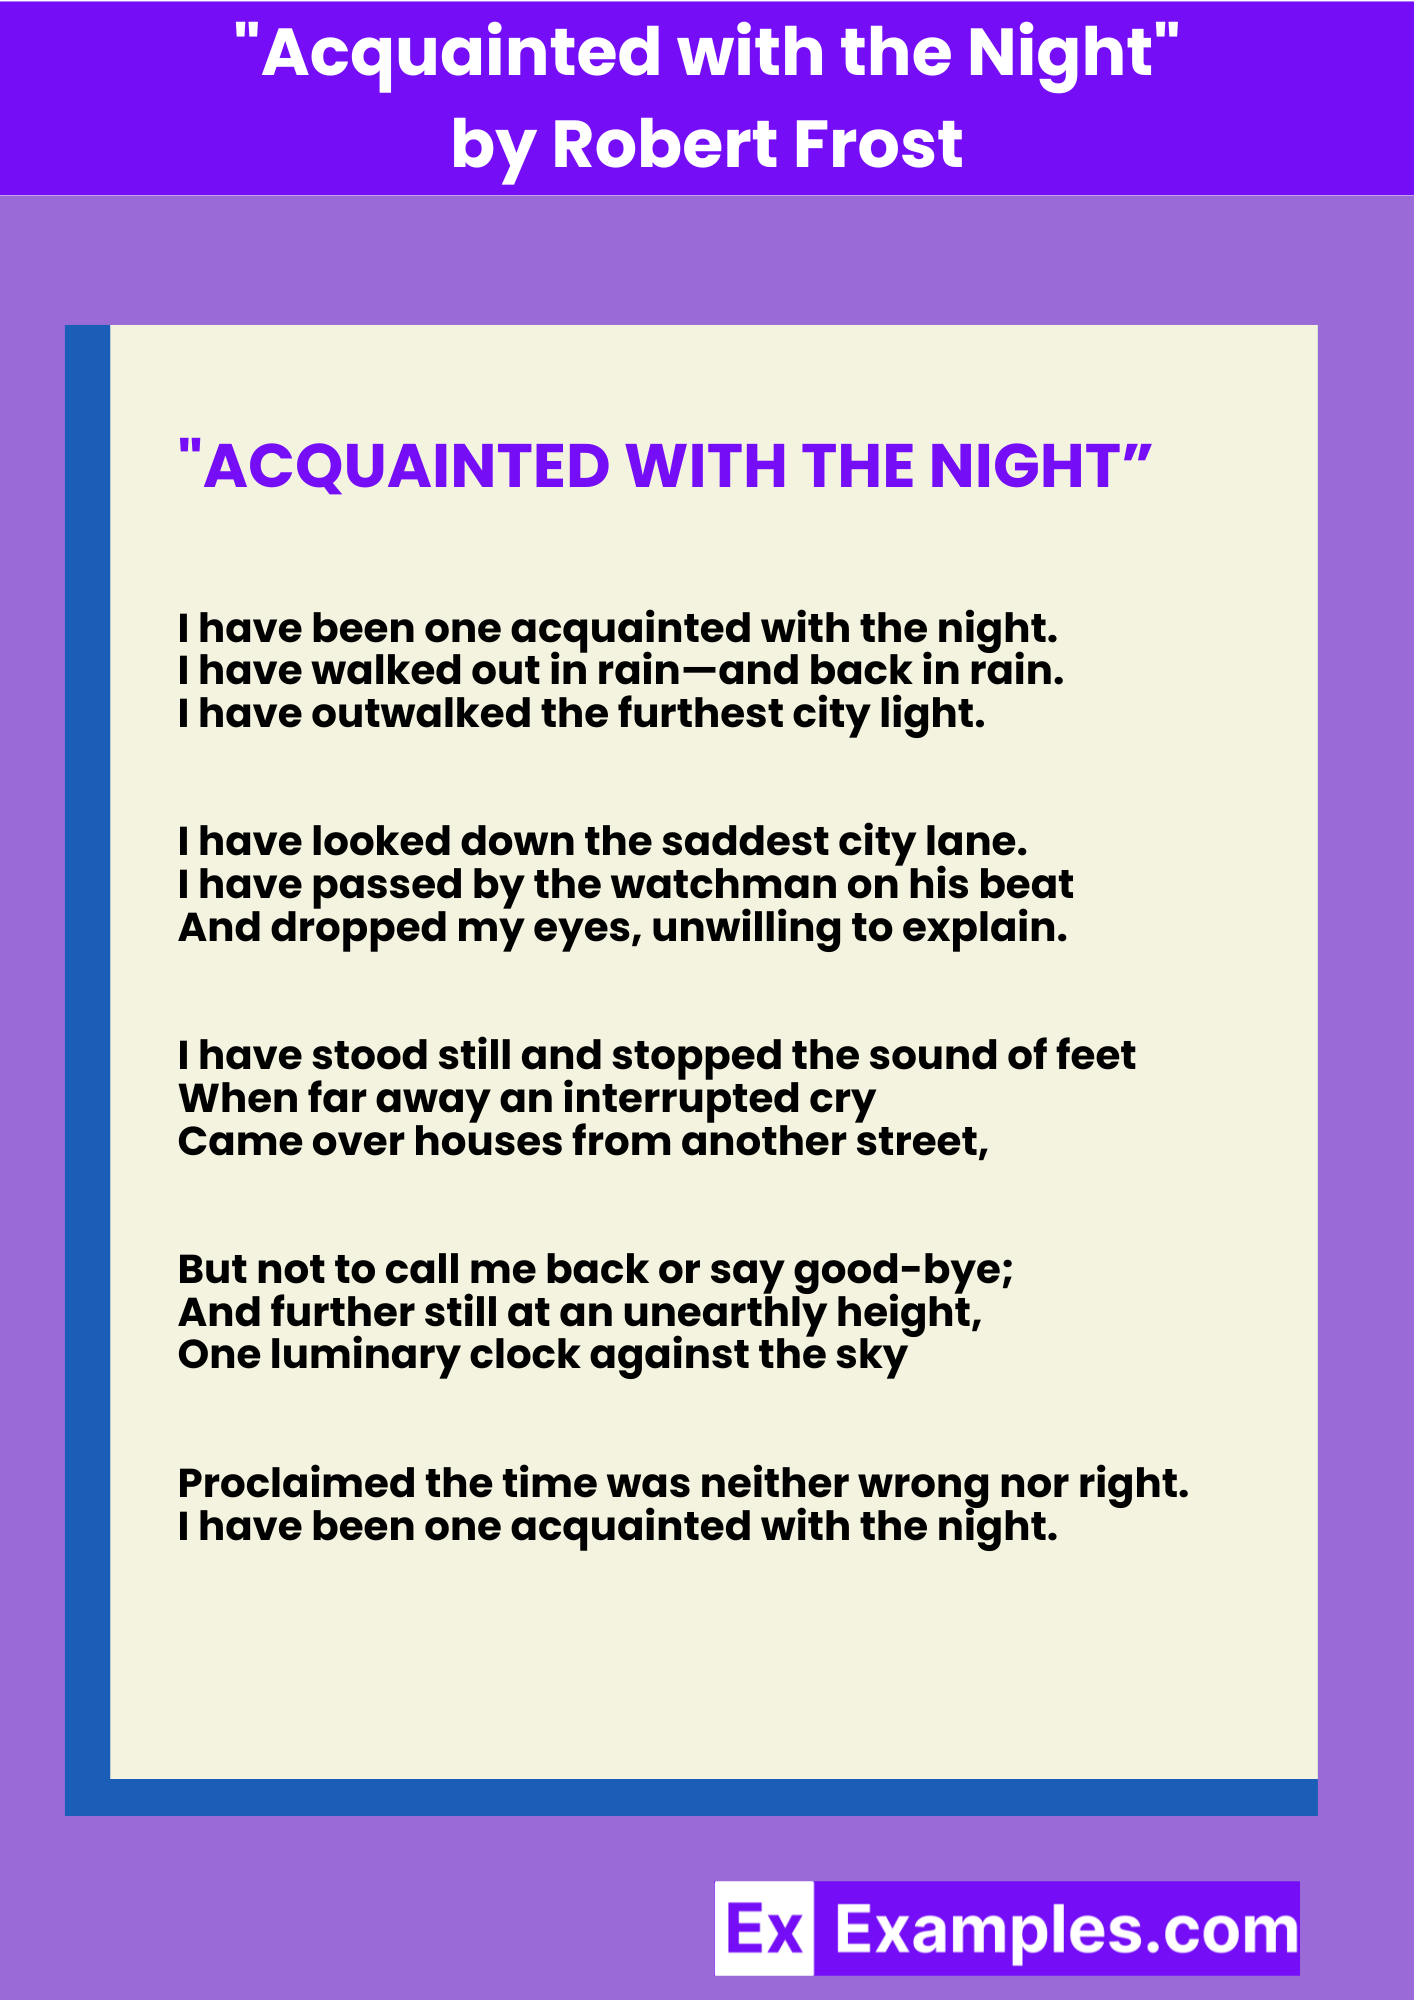 Acquainted with the Night by Robert Frost